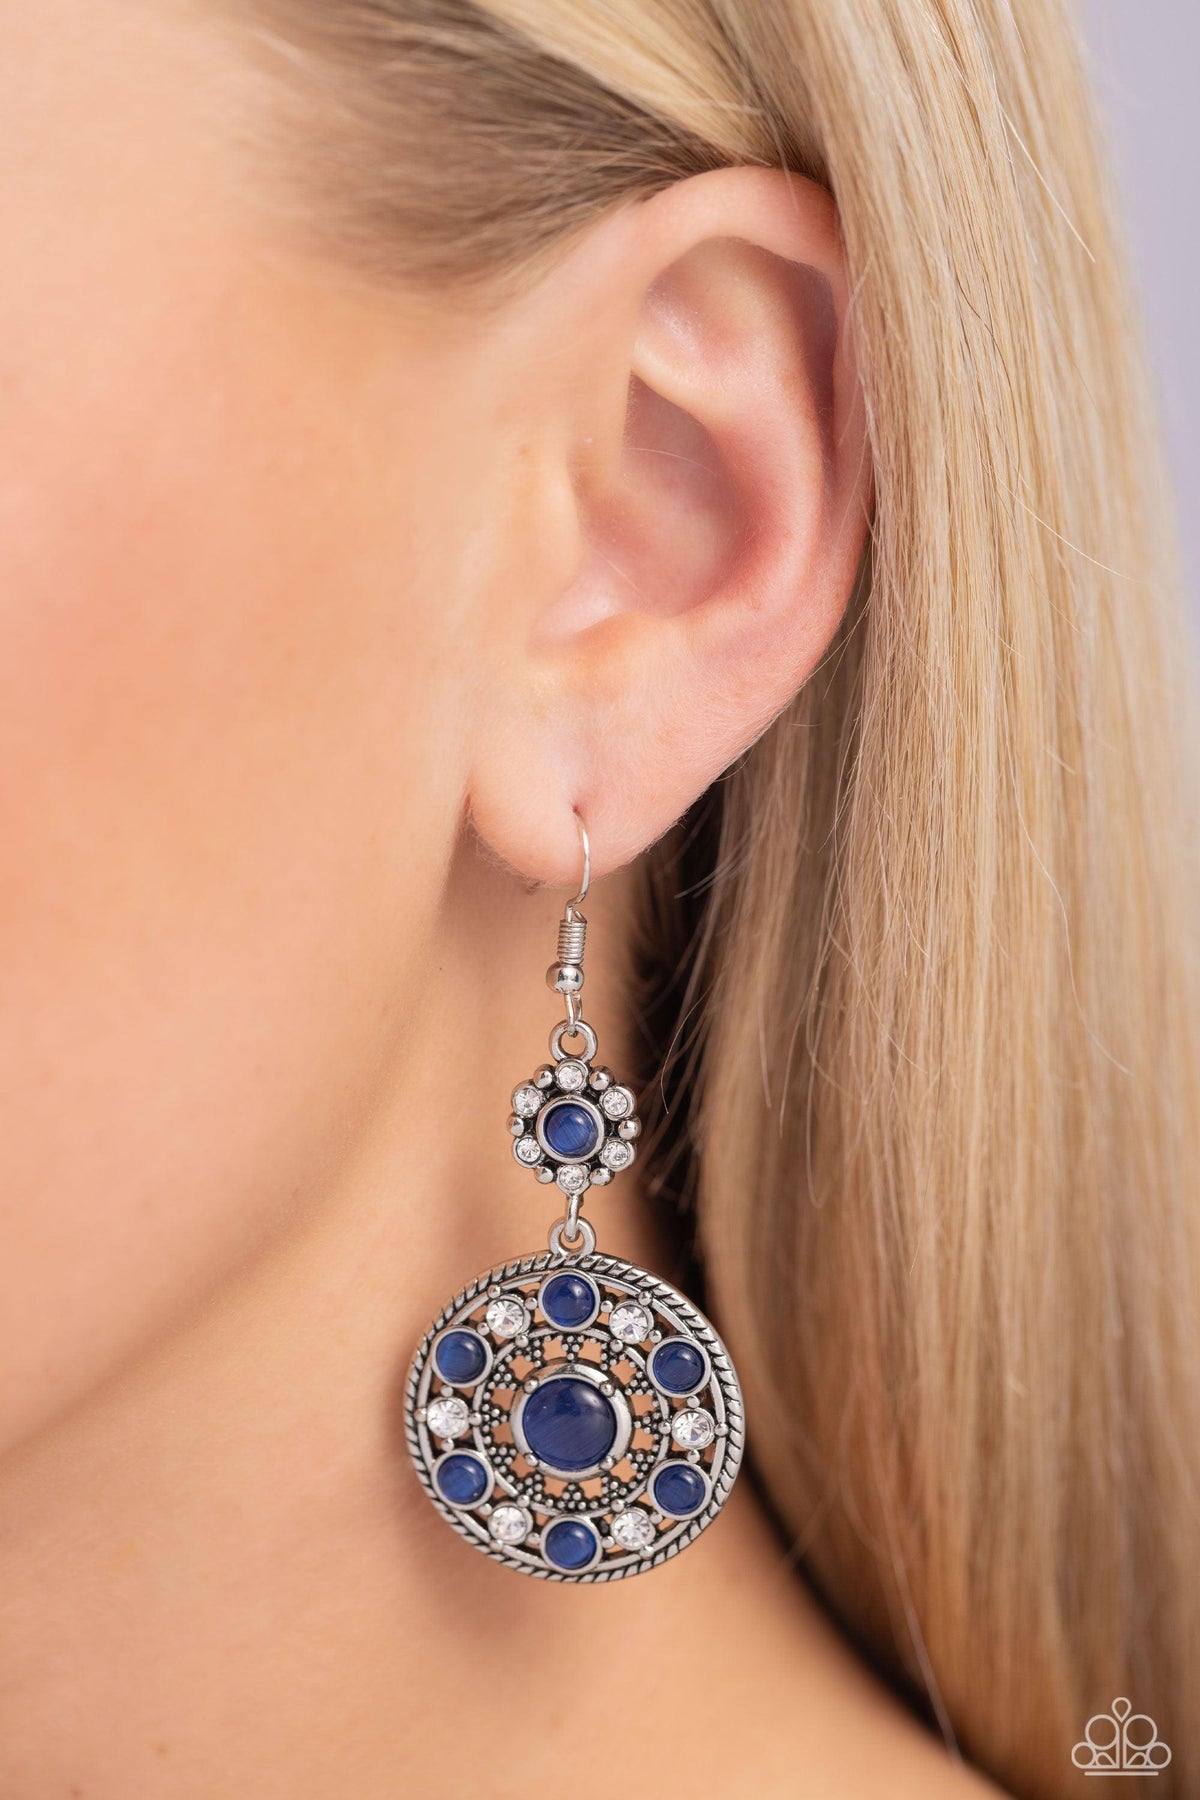 Party at My PALACE Blue Cat&#39;s Eye Stone Earrings - Paparazzi Accessories-on model - CarasShop.com - $5 Jewelry by Cara Jewels